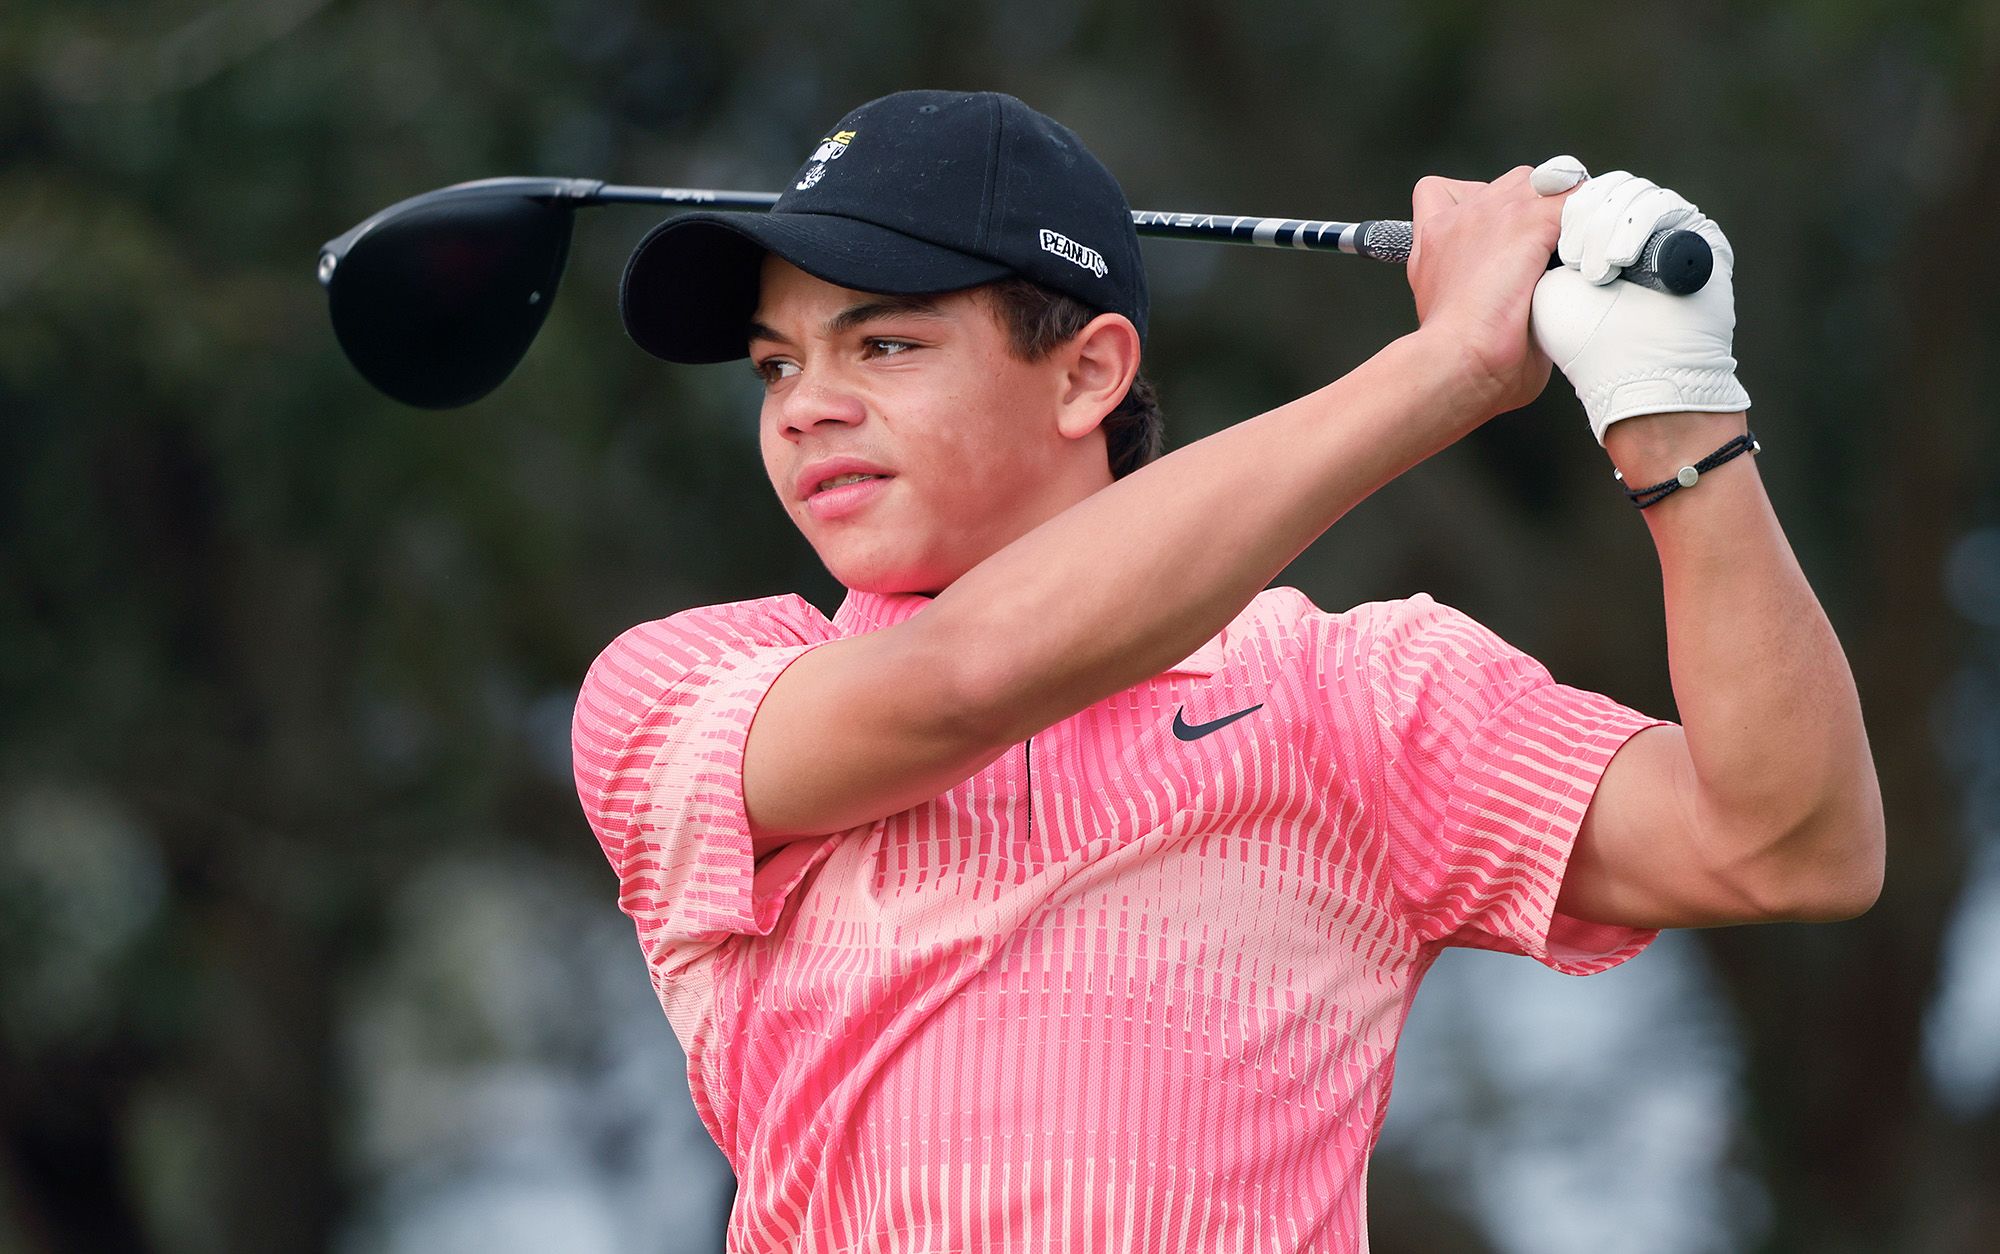 Charlie Woods shoots career-best round to win junior golf tournament – with dad Tiger on the bag | CNN